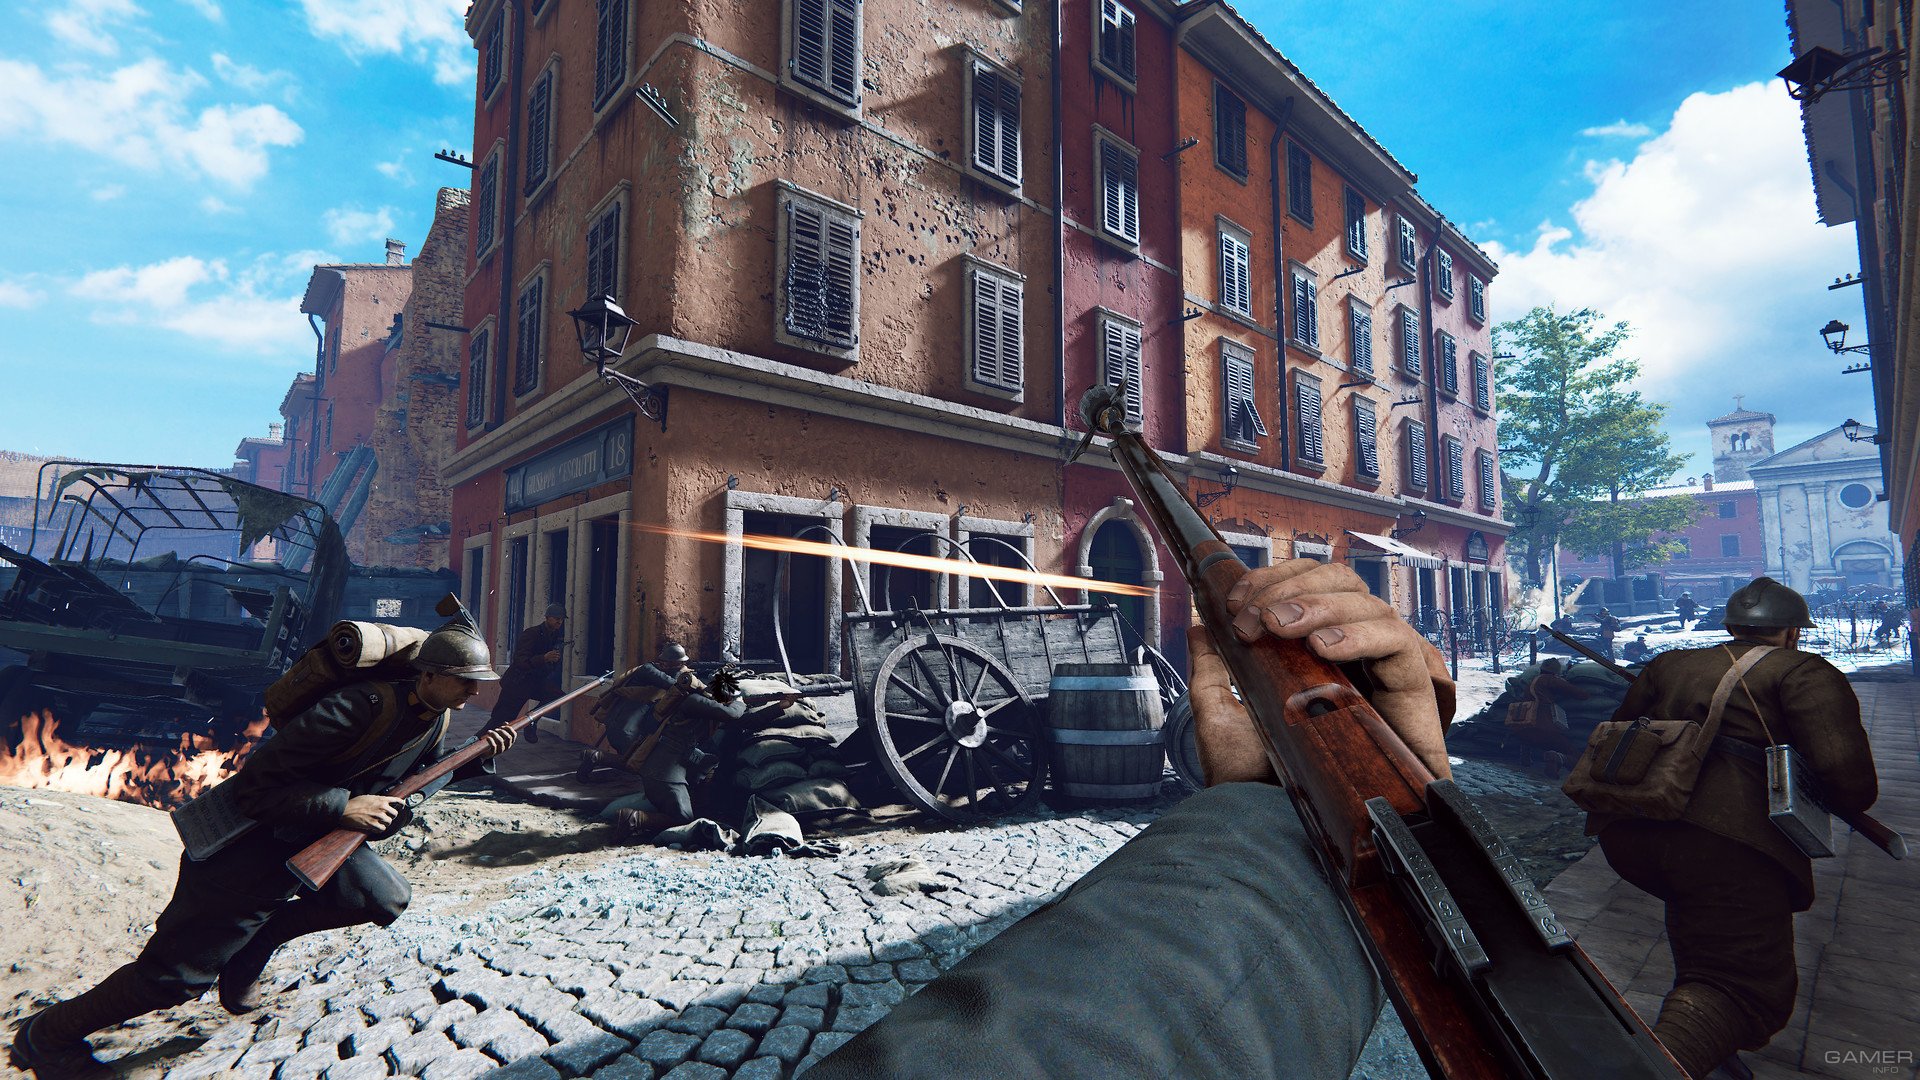 free download isonzo